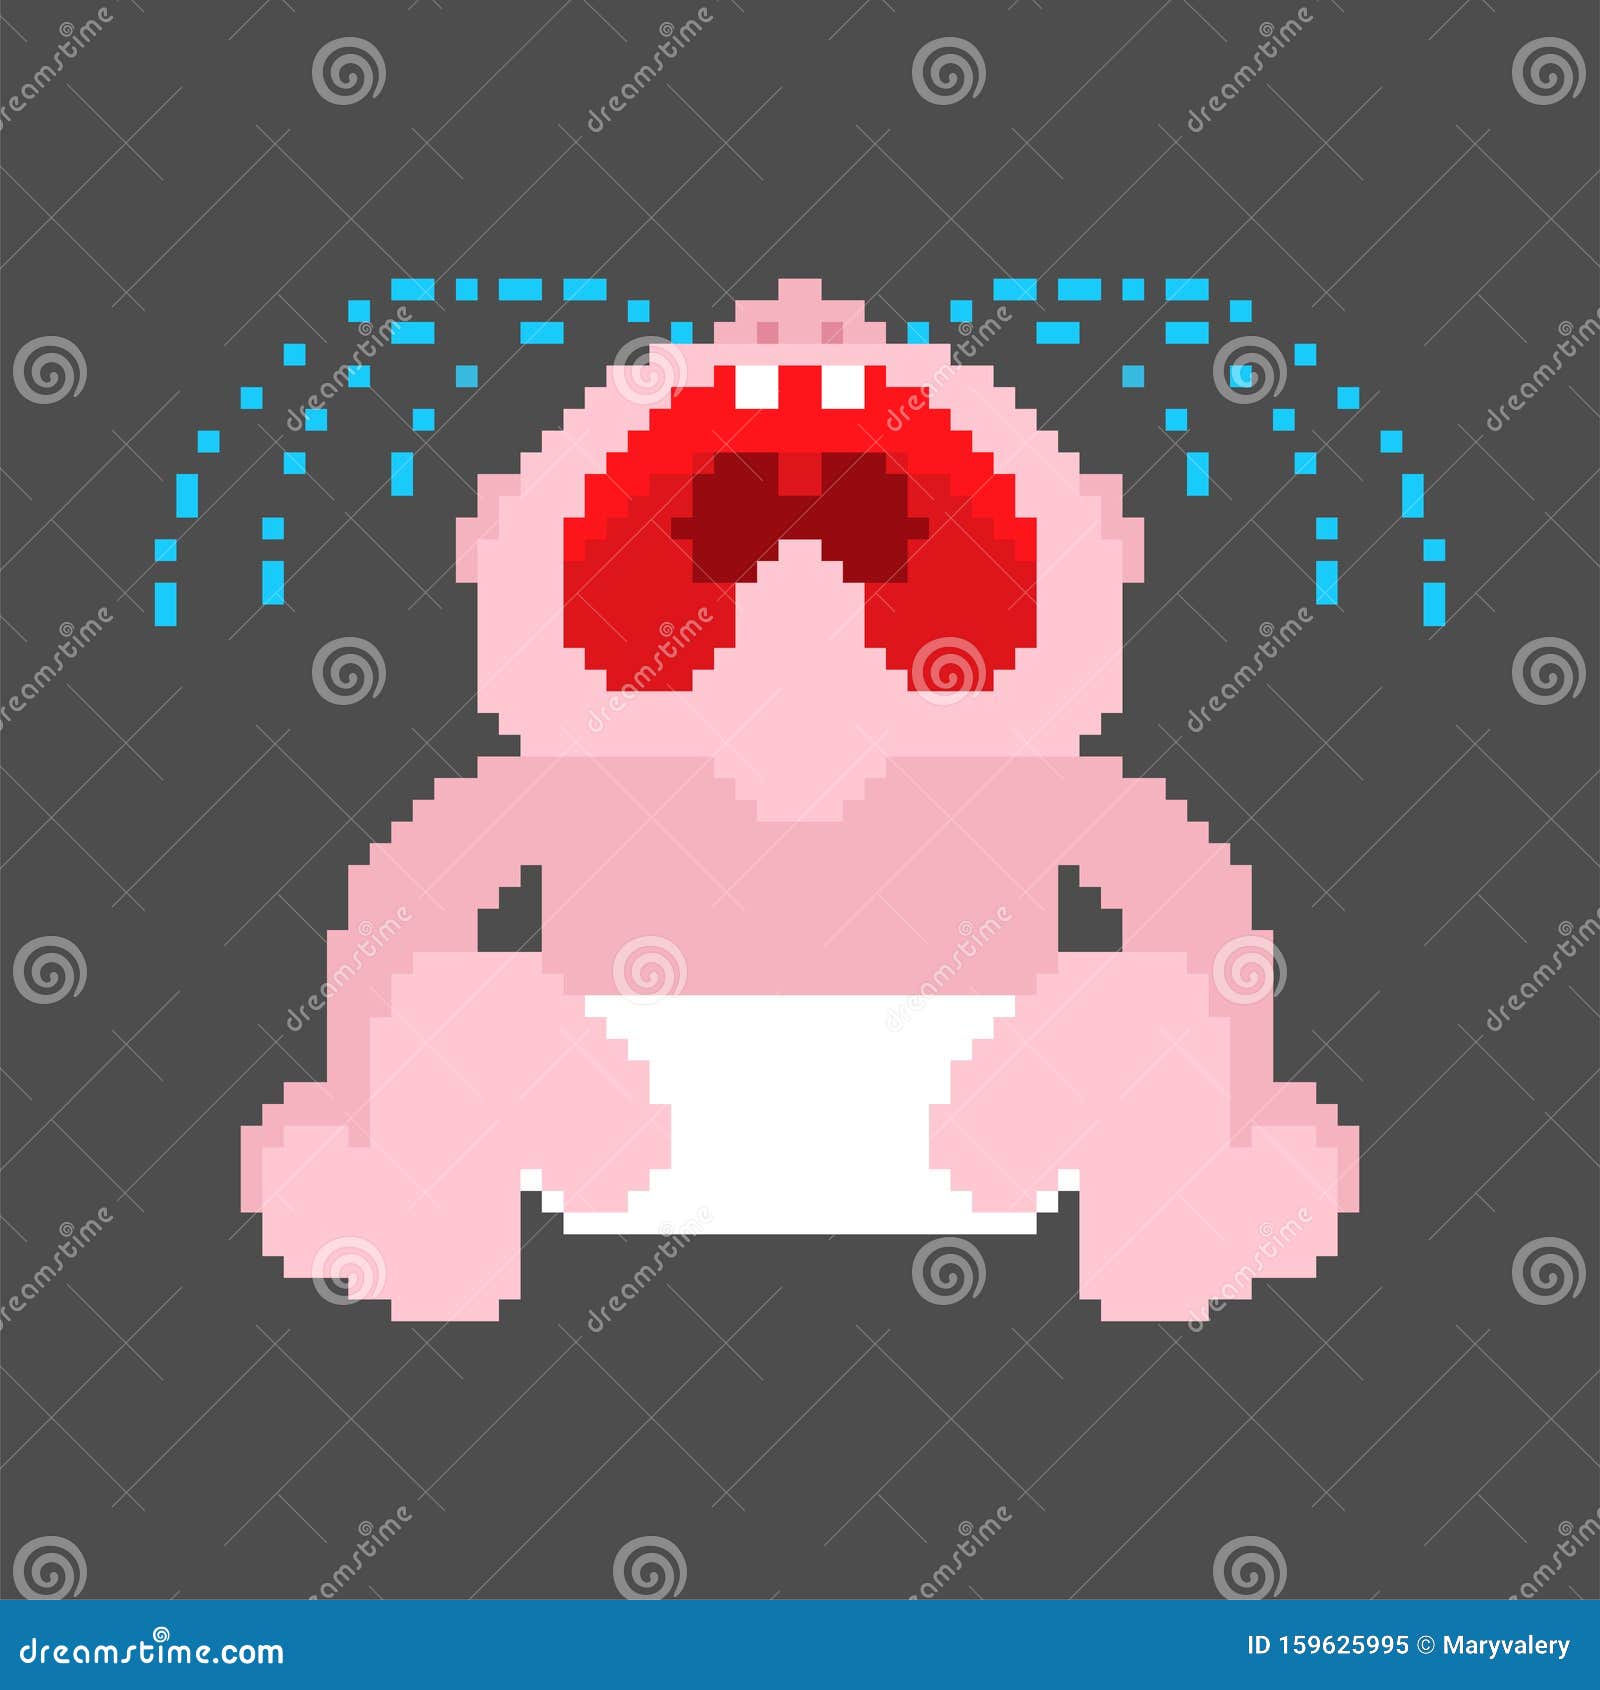 Crying Baby Pixel Art. 8 Bit Little Child Cry. Vector Illustration